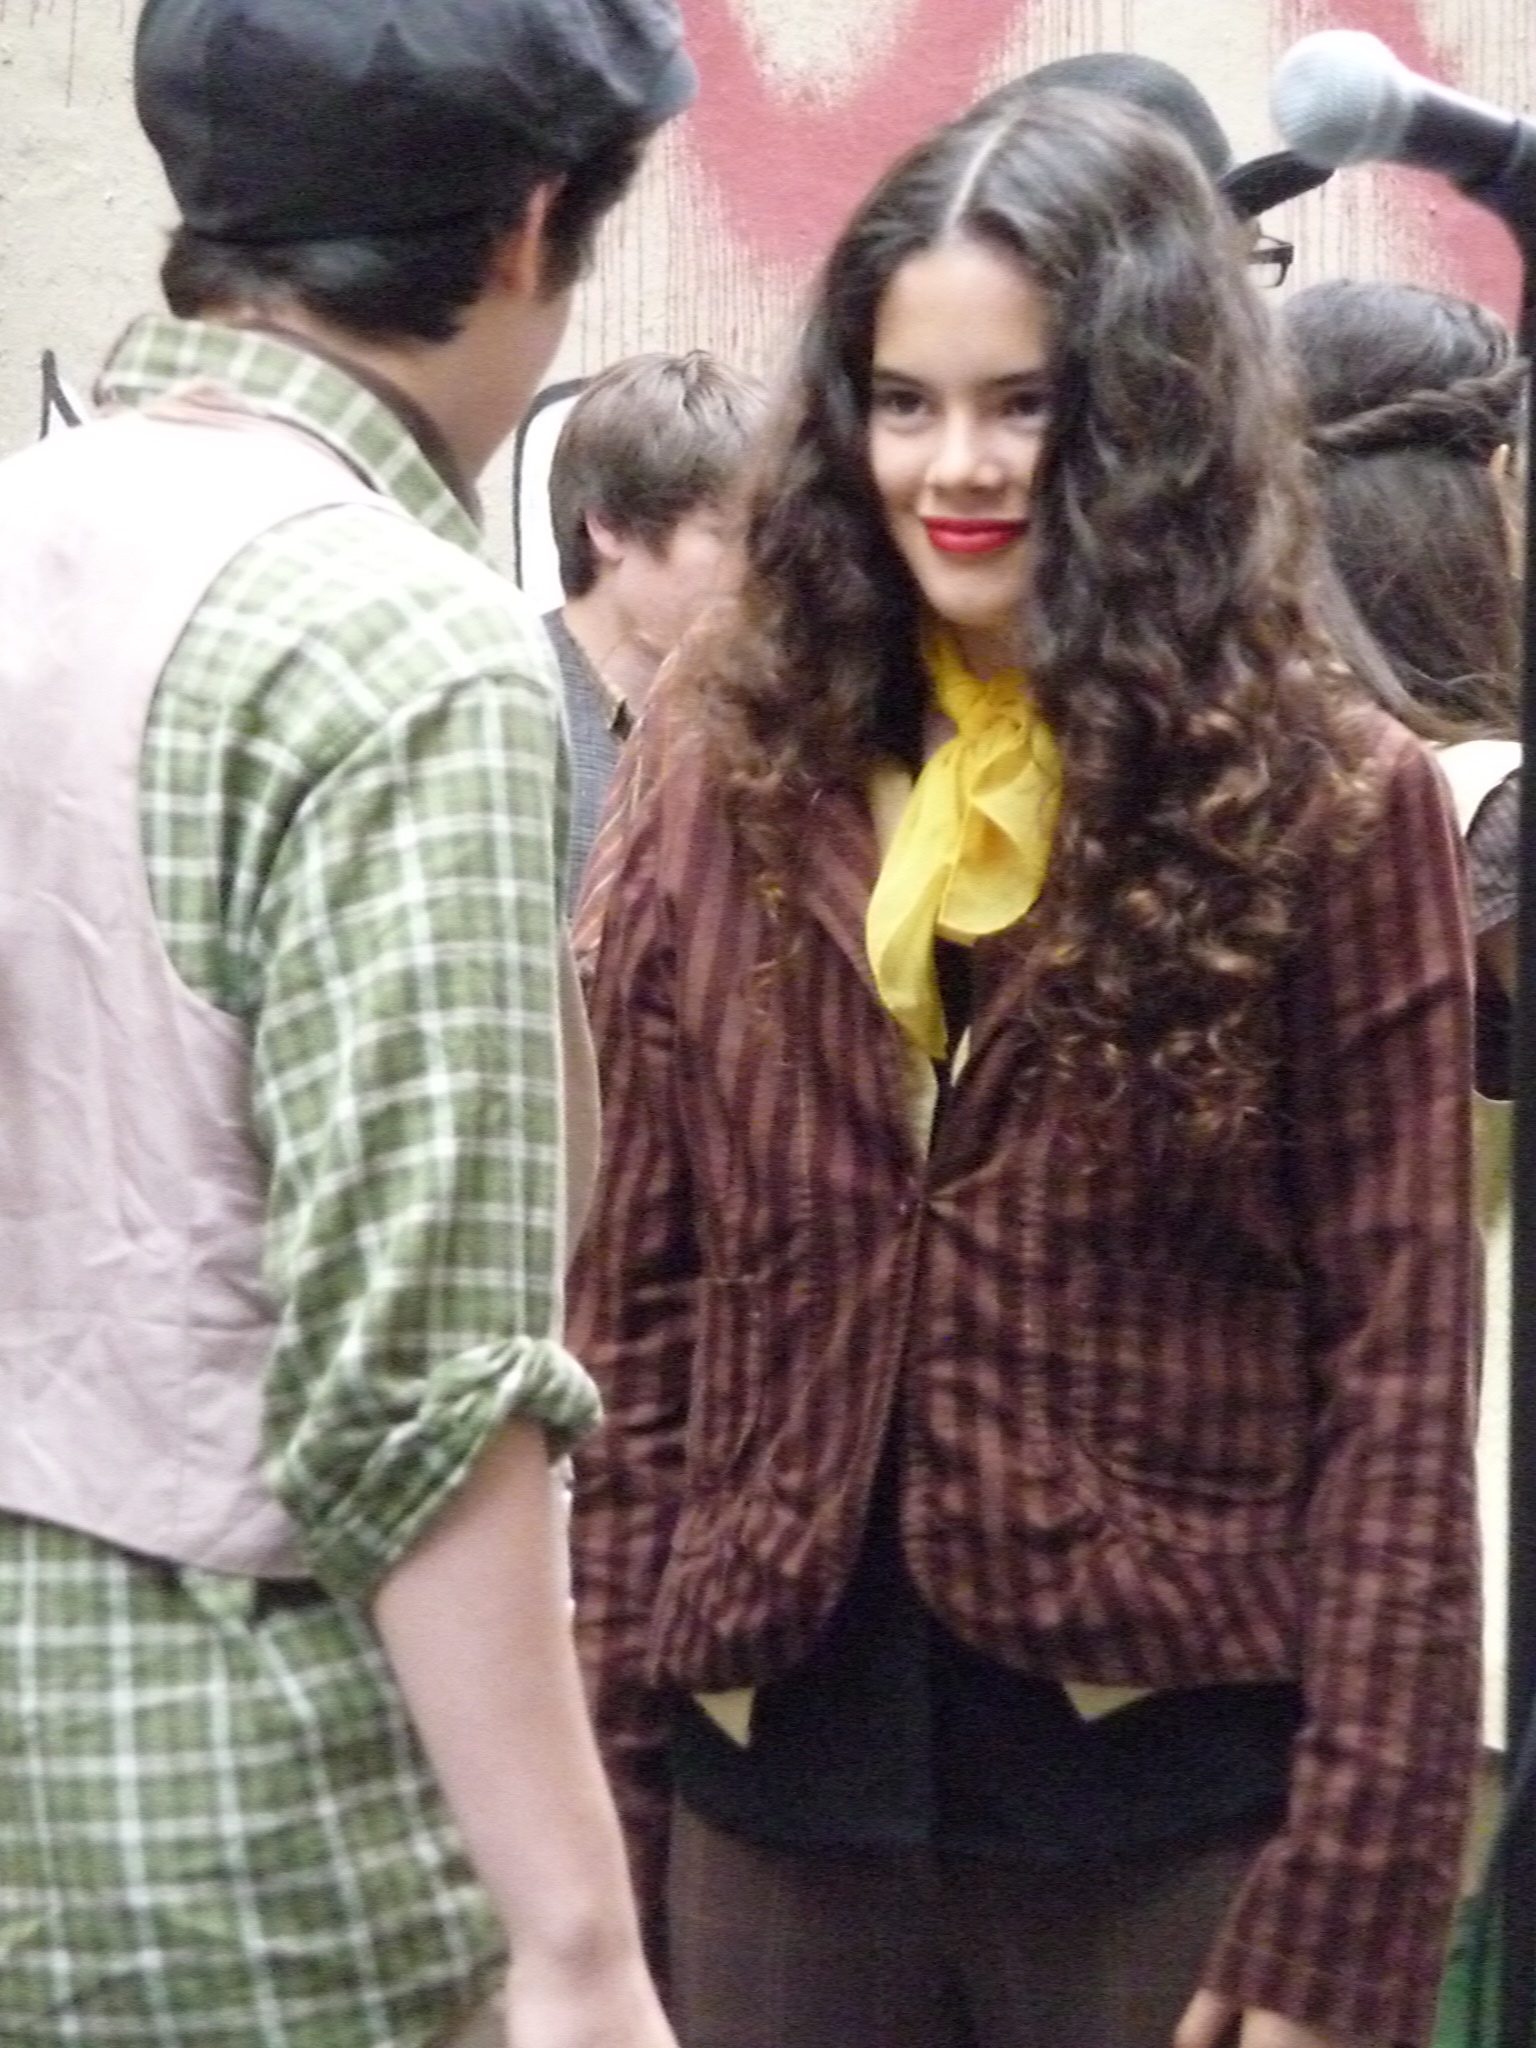 a woman with long hair and black stockings talks with a young man